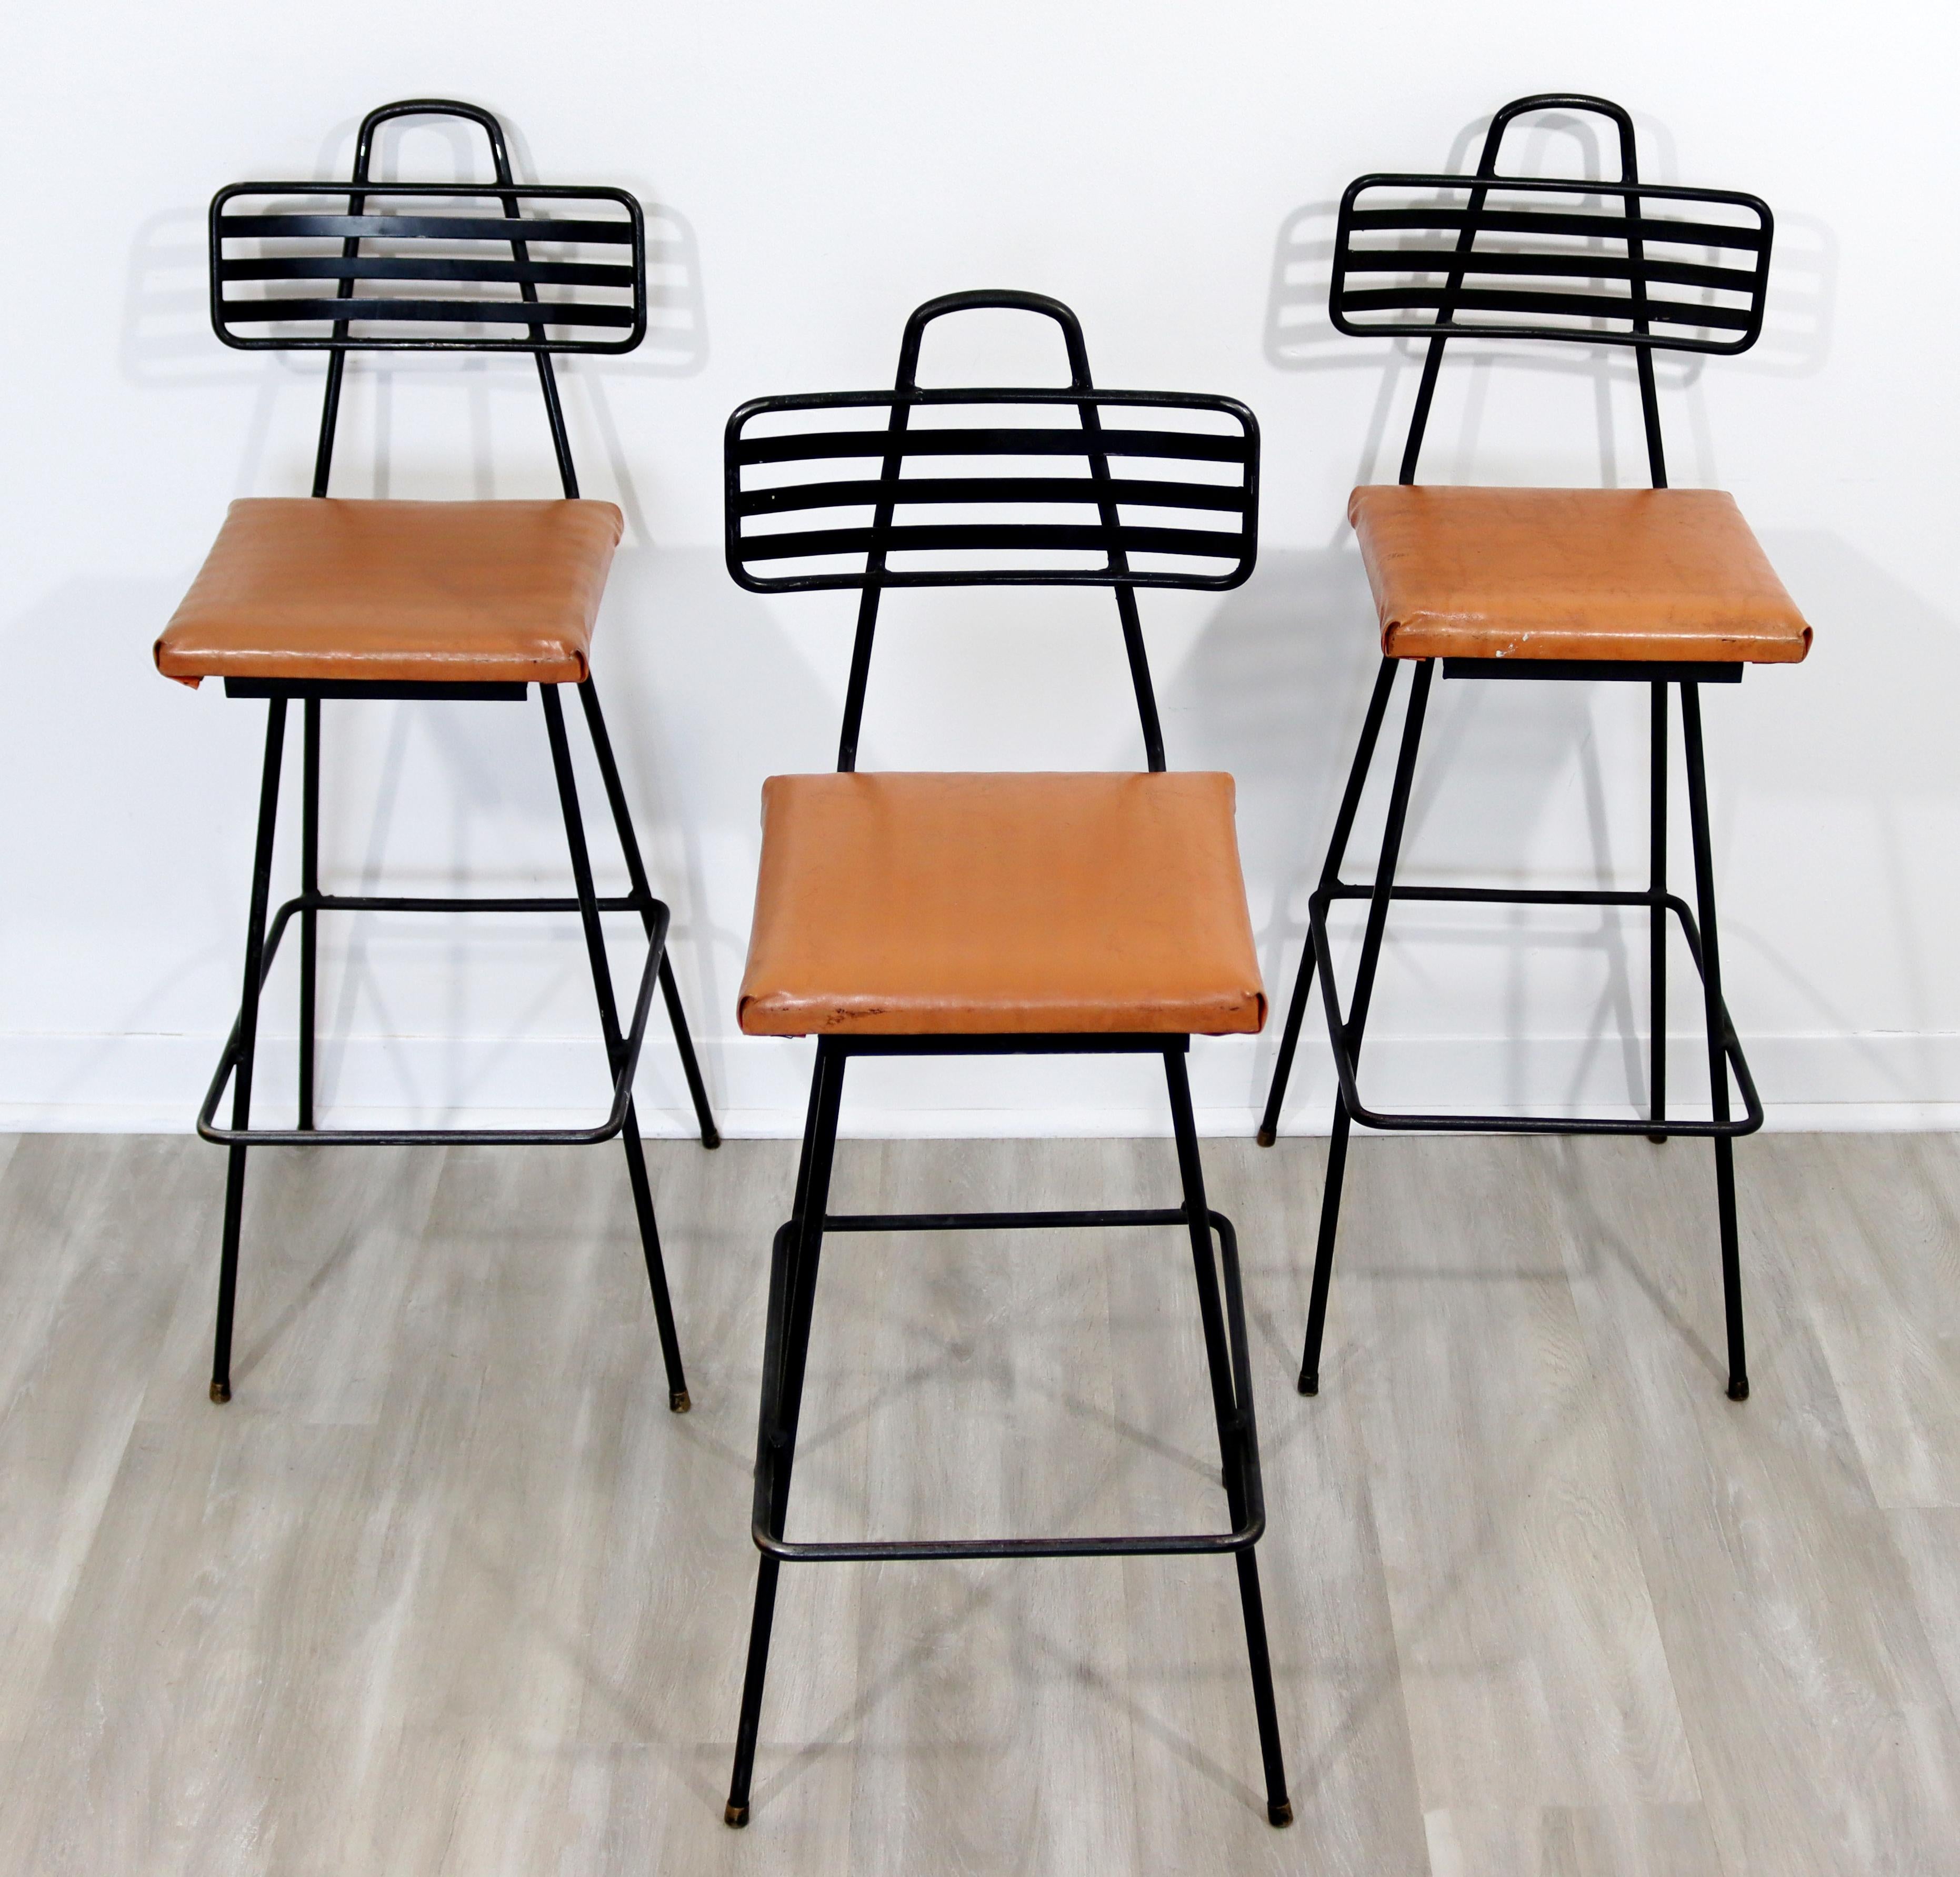 For your consideration is a fantastic set of three wrought iron bar stools, with vinyl seats, by Tony Paul, circa the 1960s. In very good vintage condition. The dimensions are 15